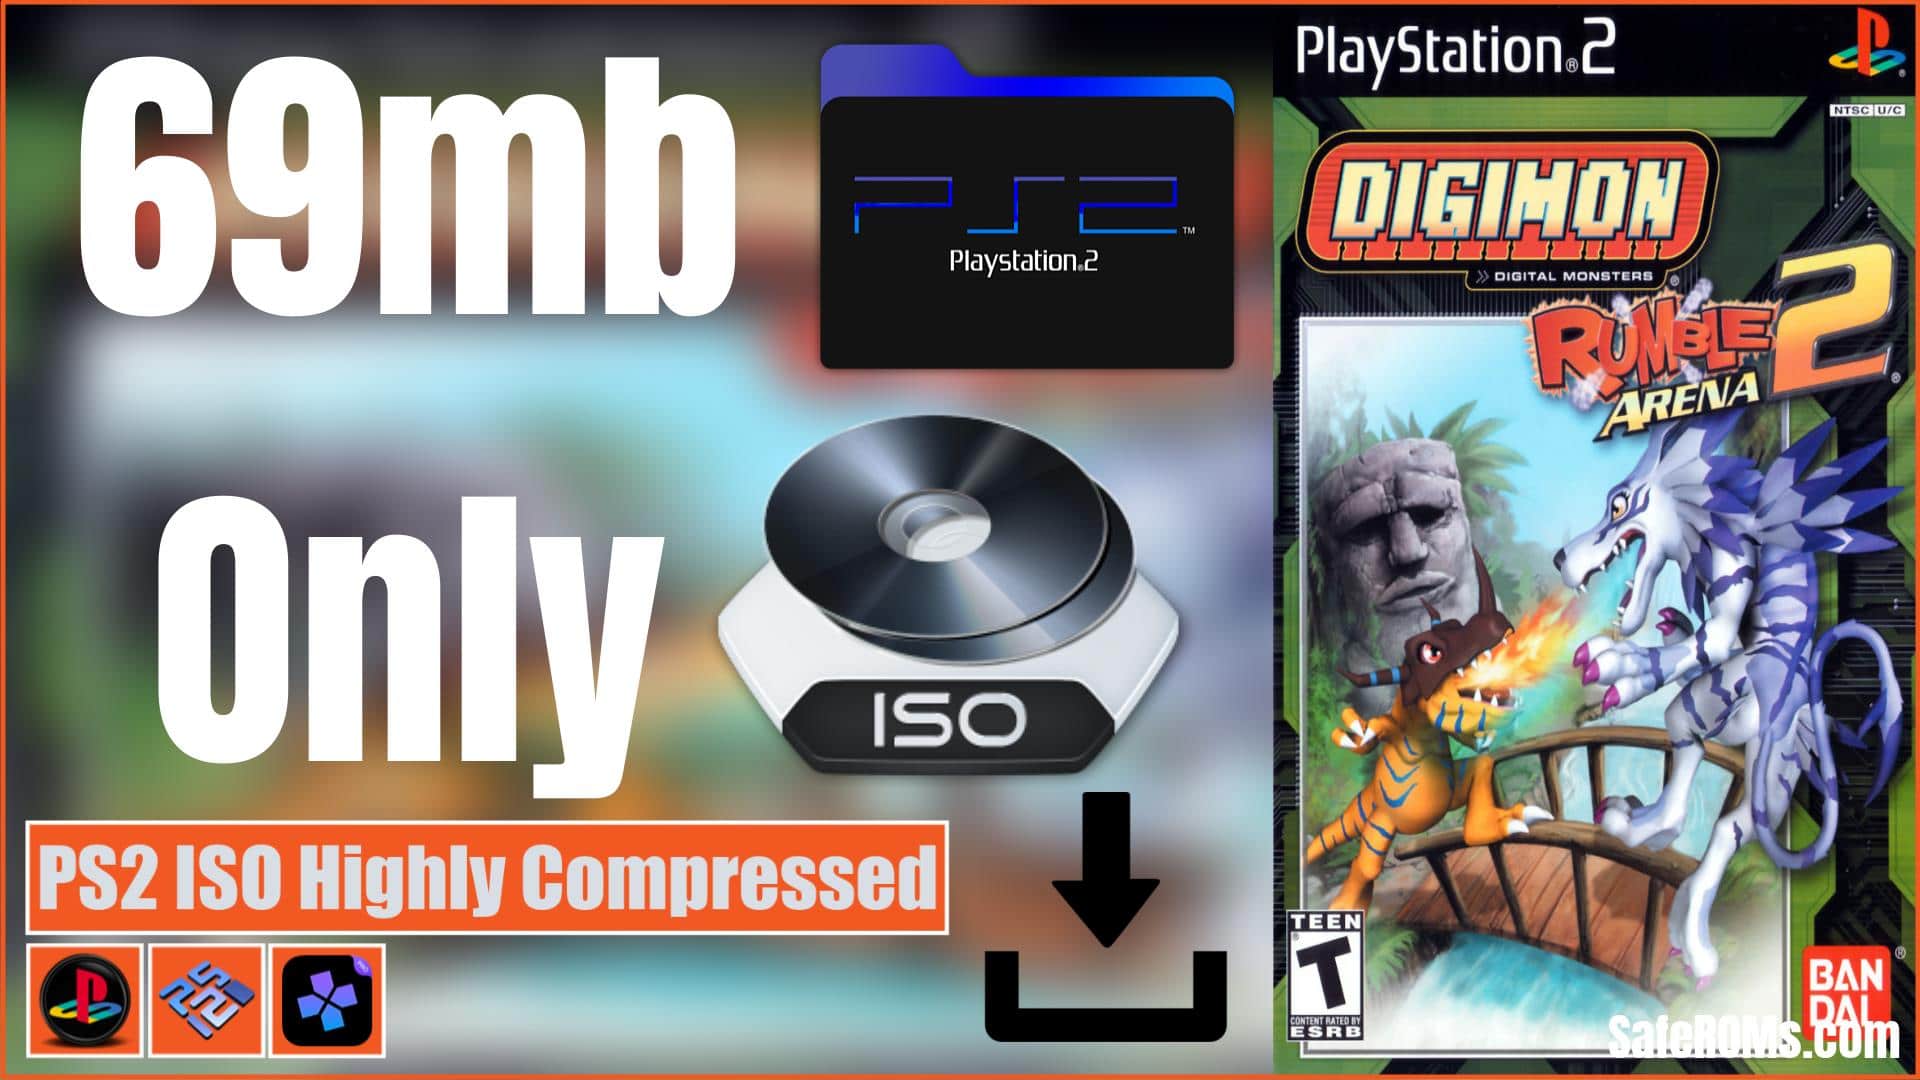 Bully psp iso highly compressed